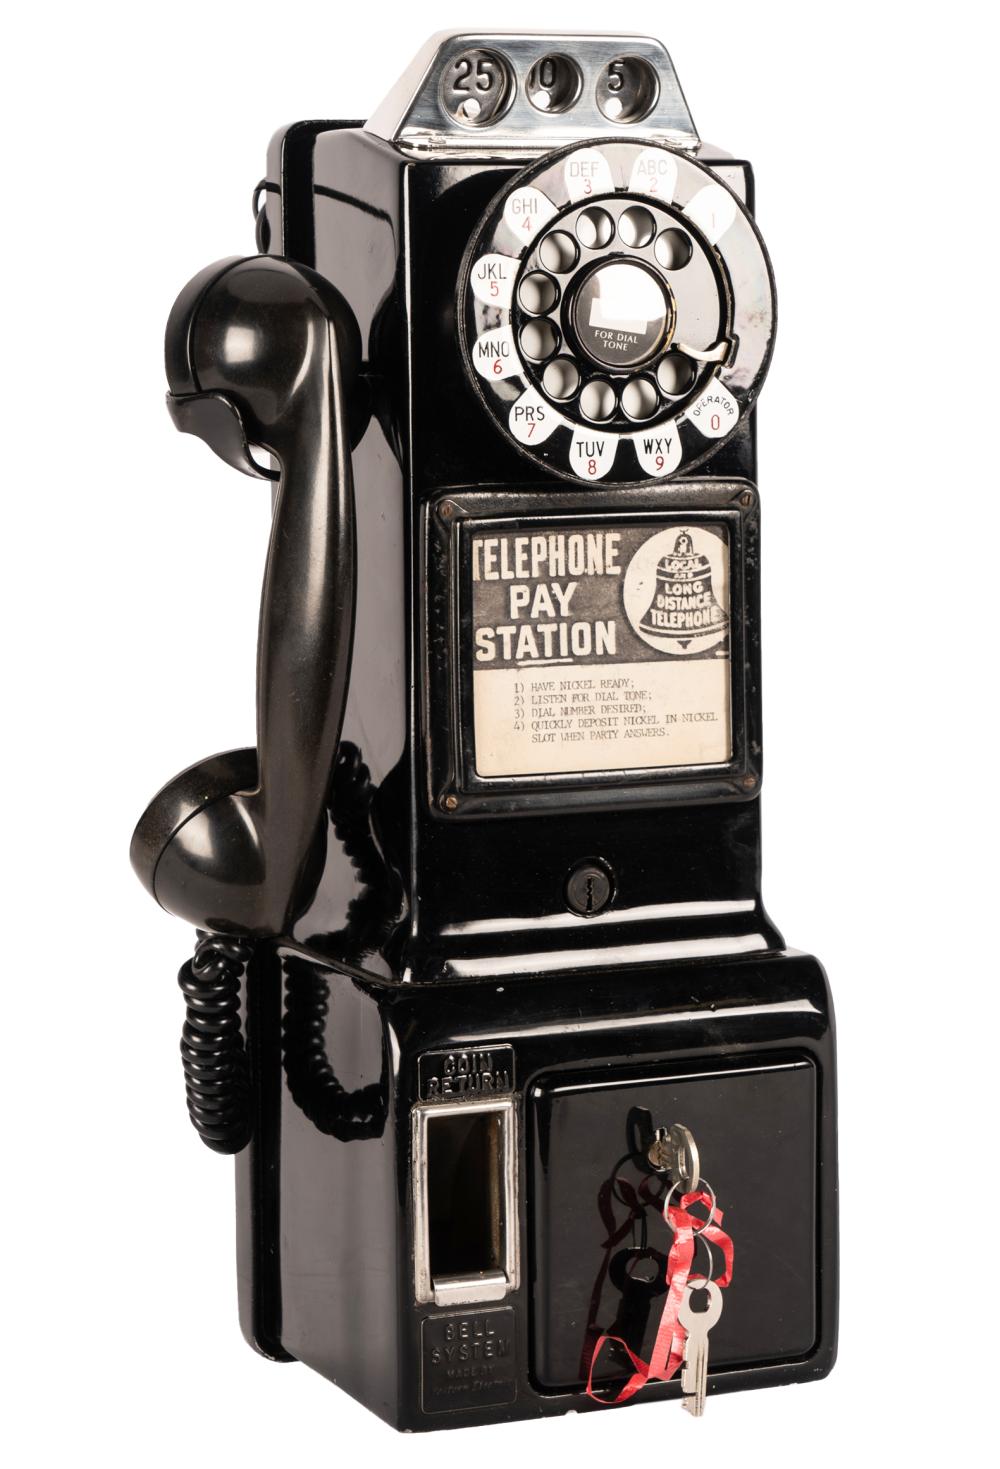 MODERN ELECTRIC PAY PHONEwith two 32fdc2